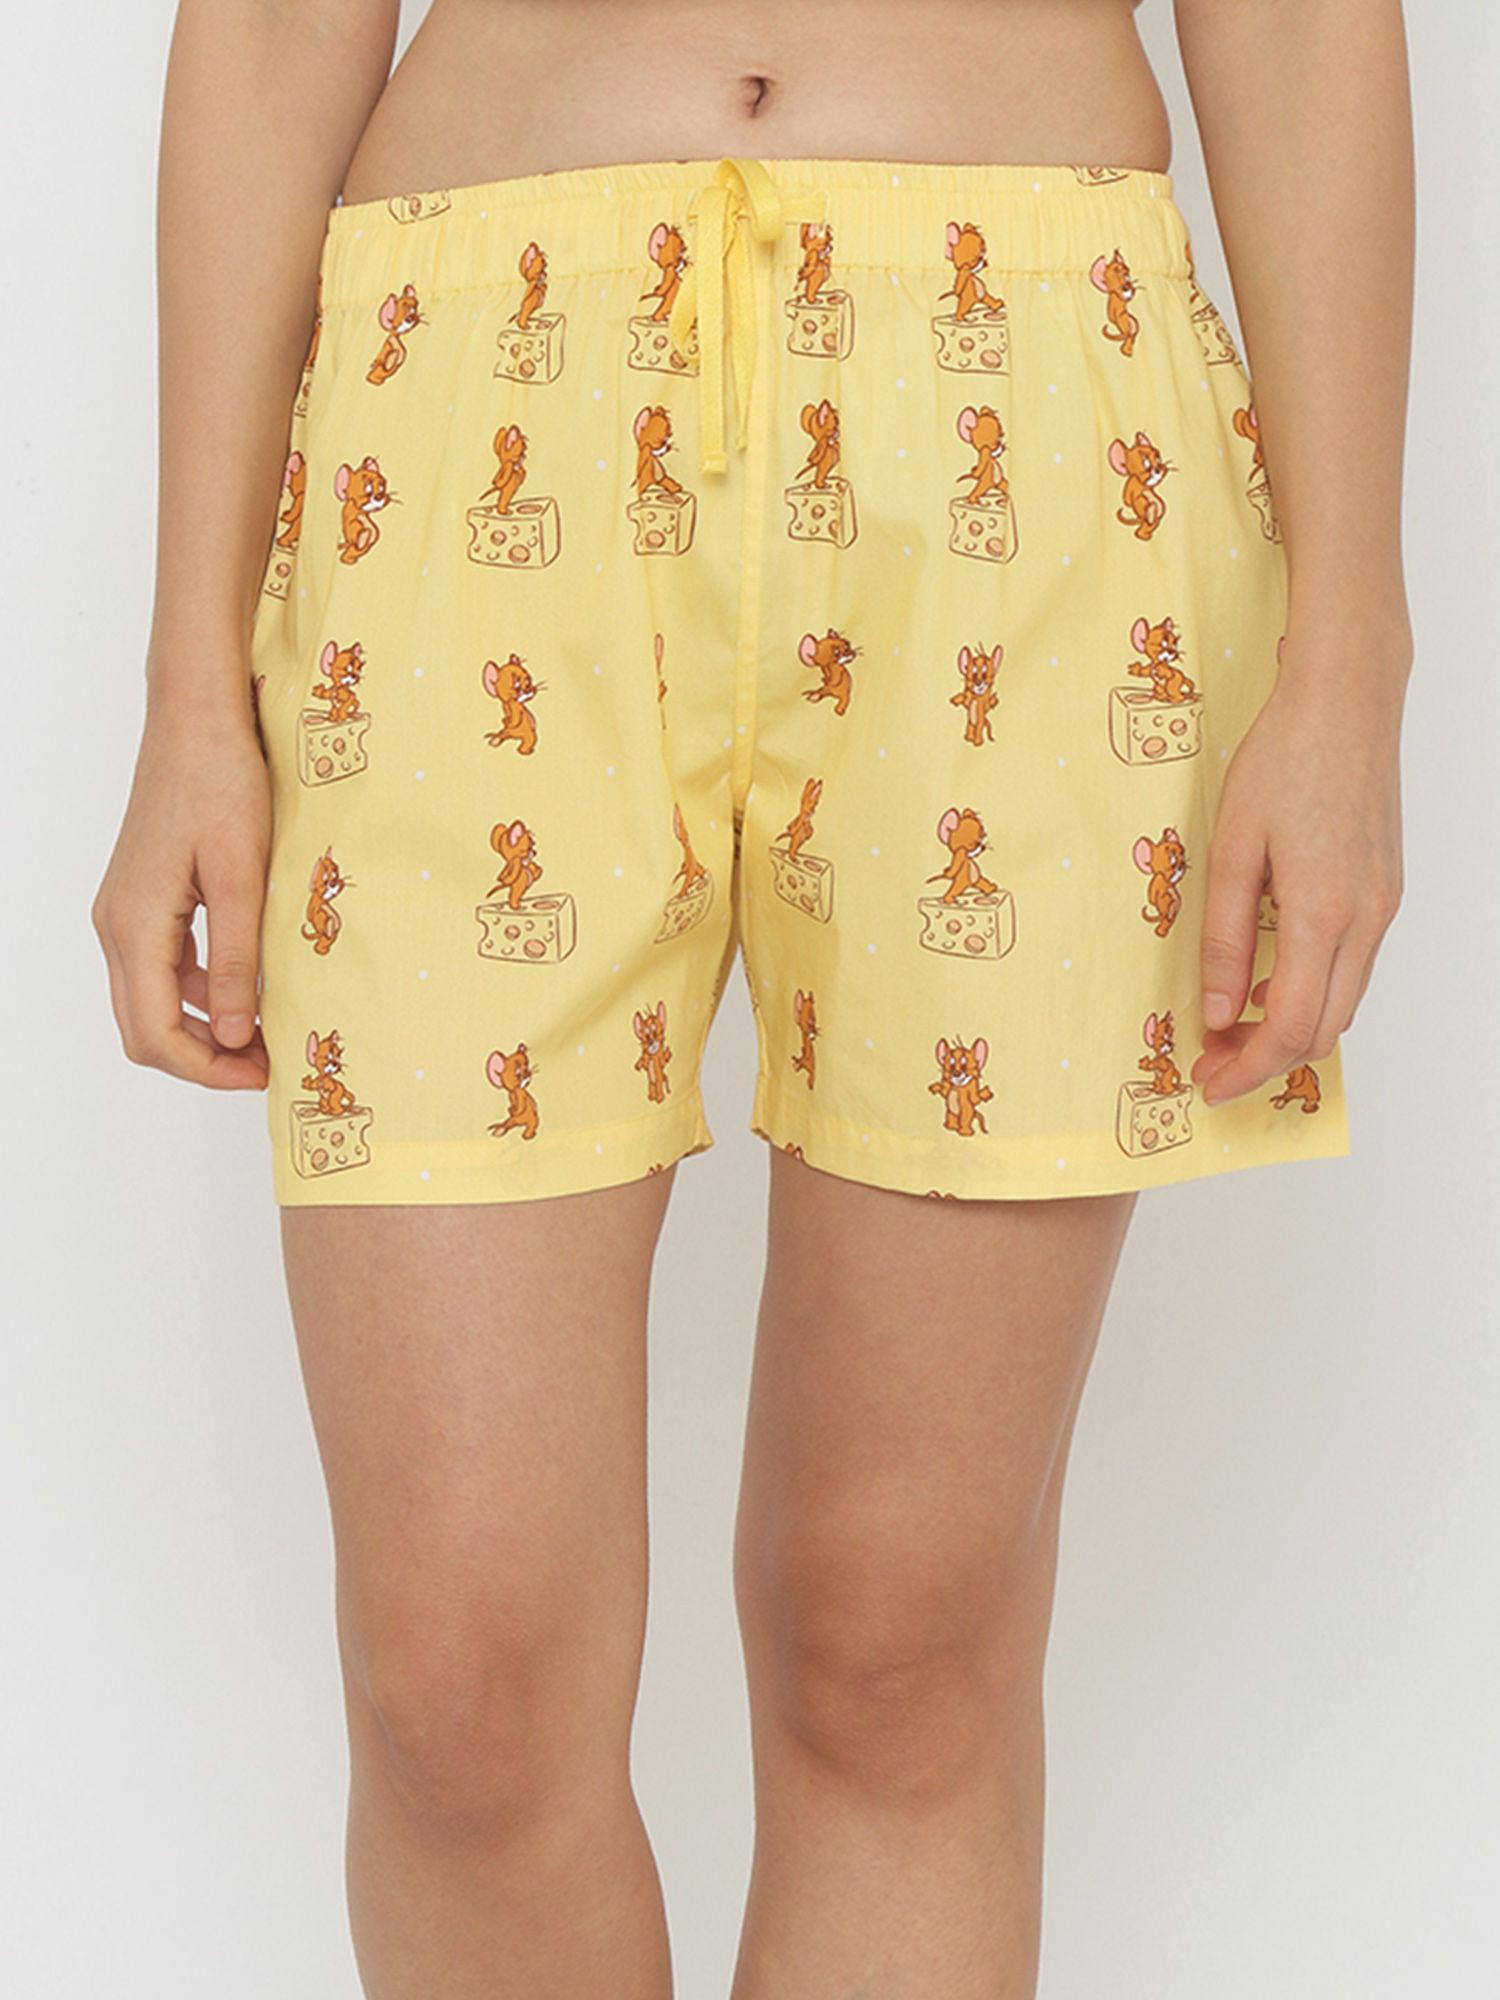 tom & jerry let's get cheesy comfy womens boxers - yellow